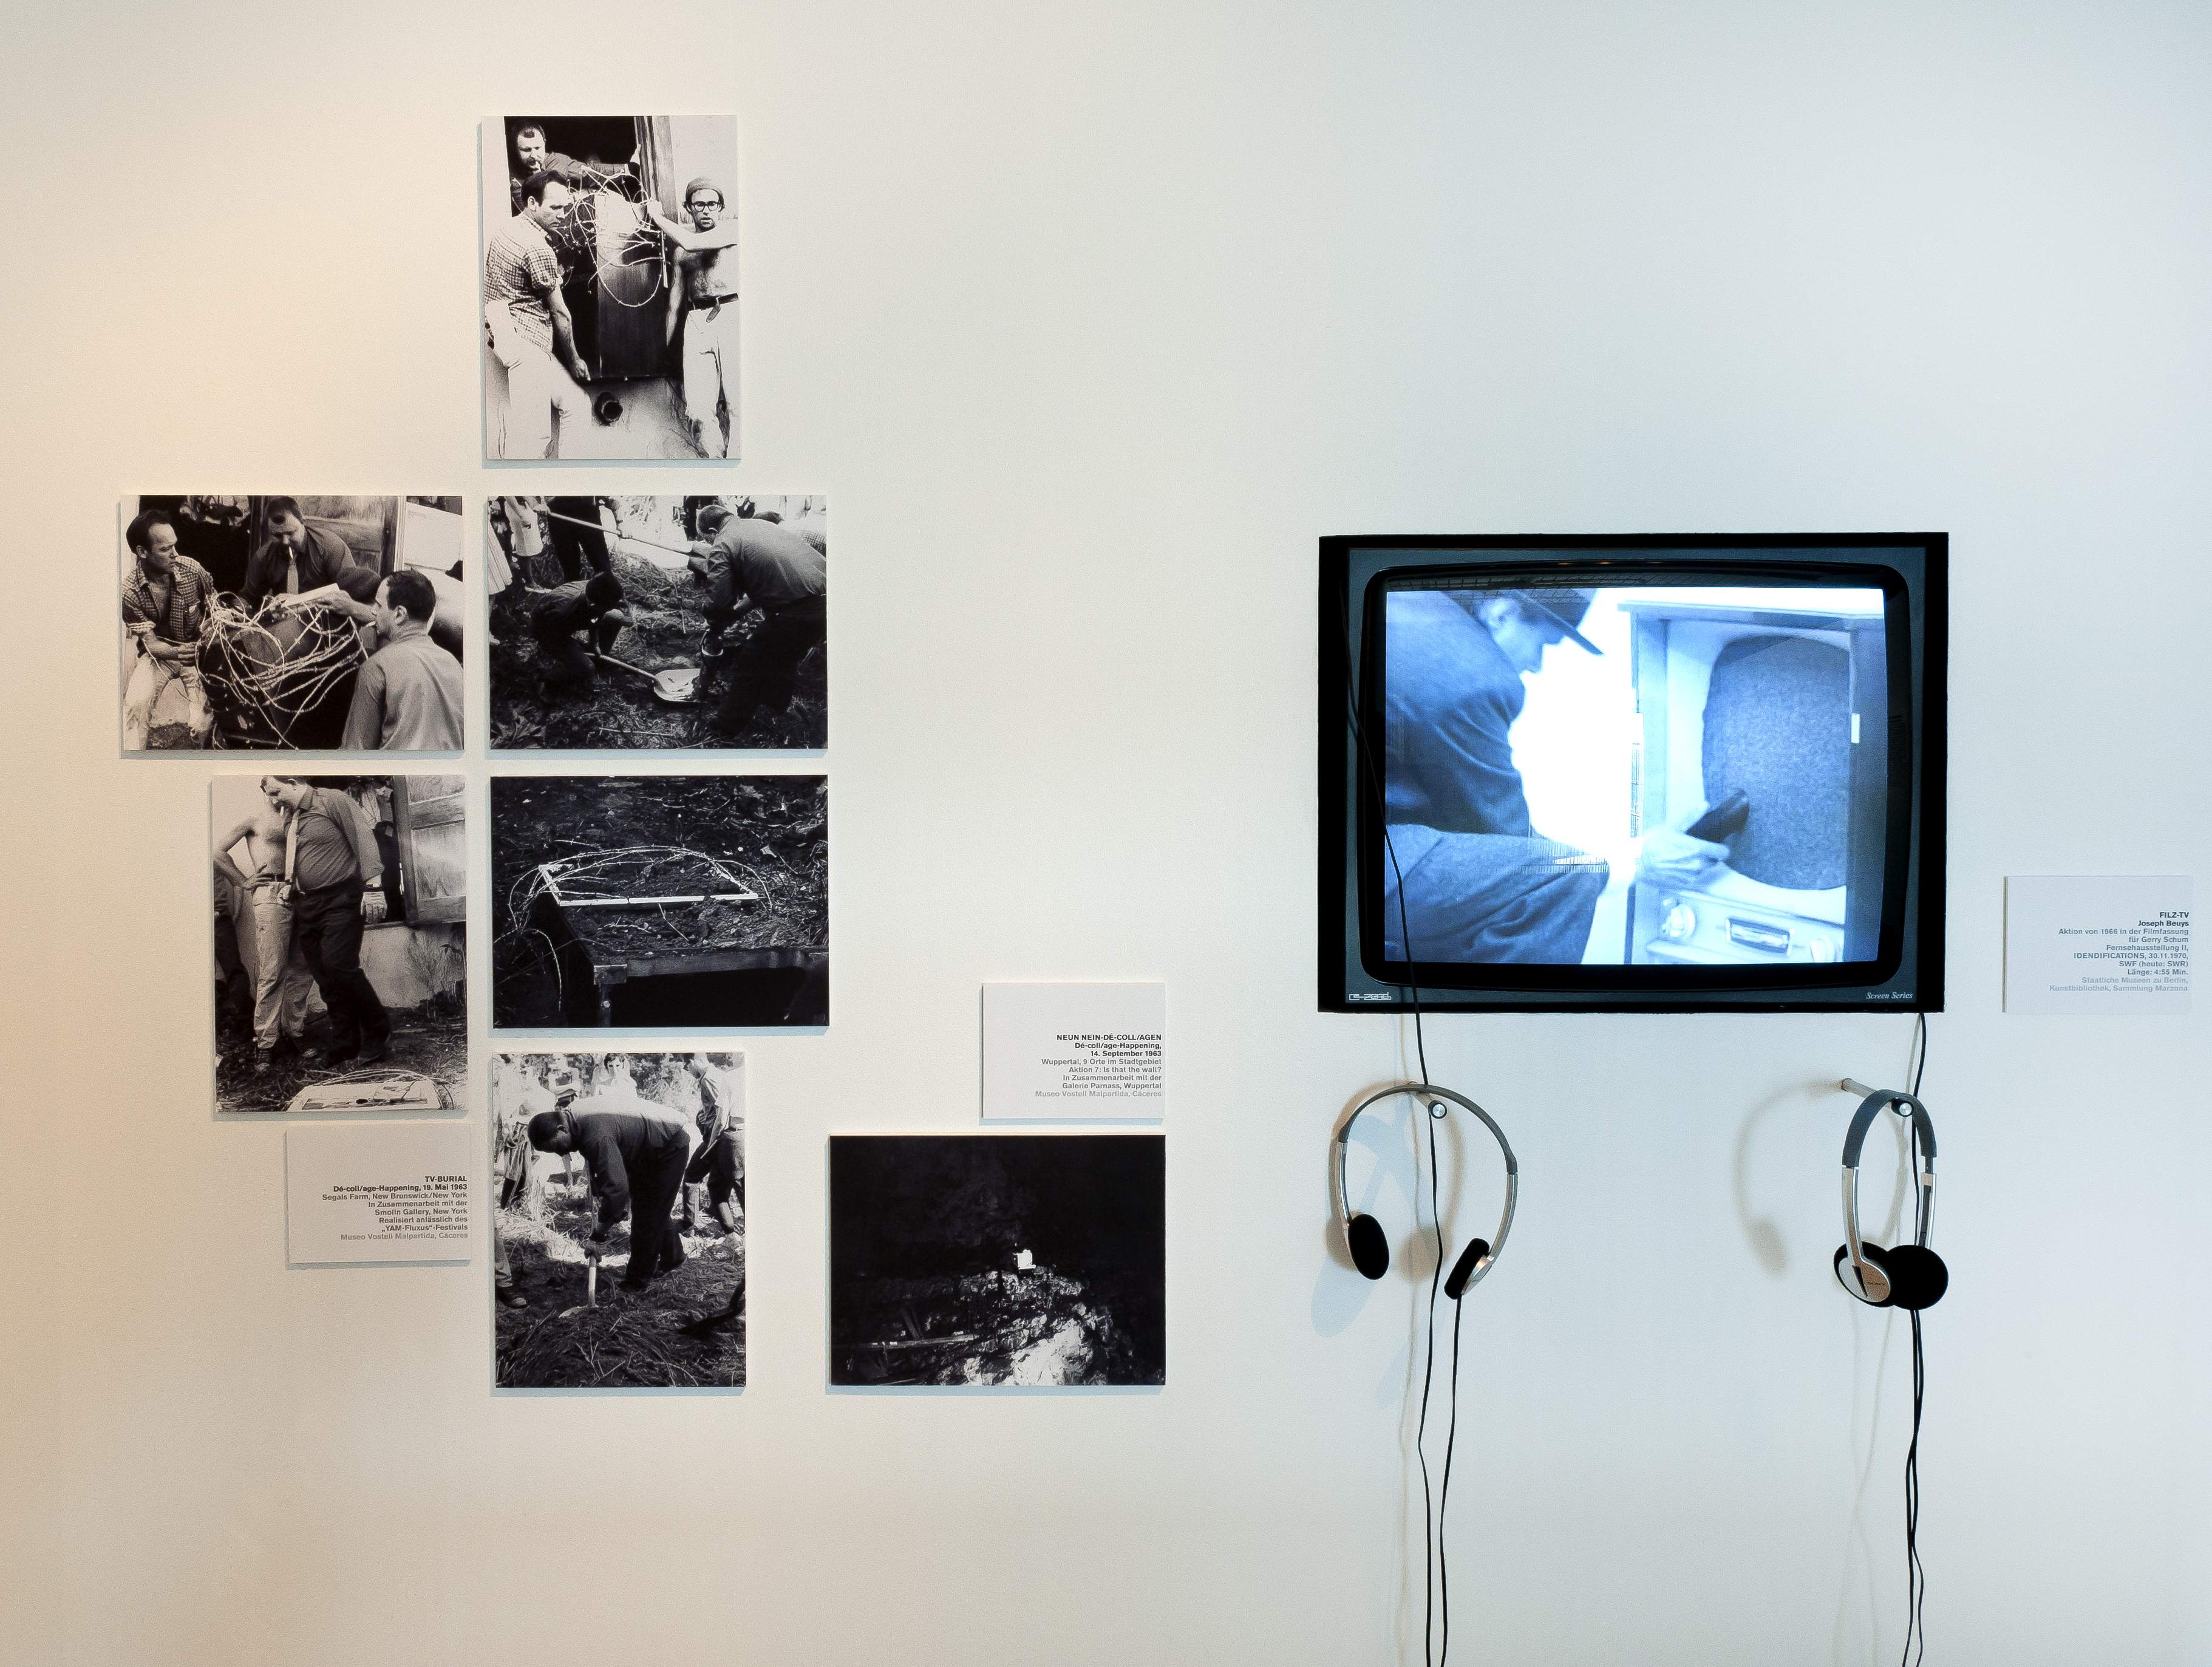 View of the exhibition „Experimental Television of the 1960s and ’70s", Deutsche Kinemathek, Berlin